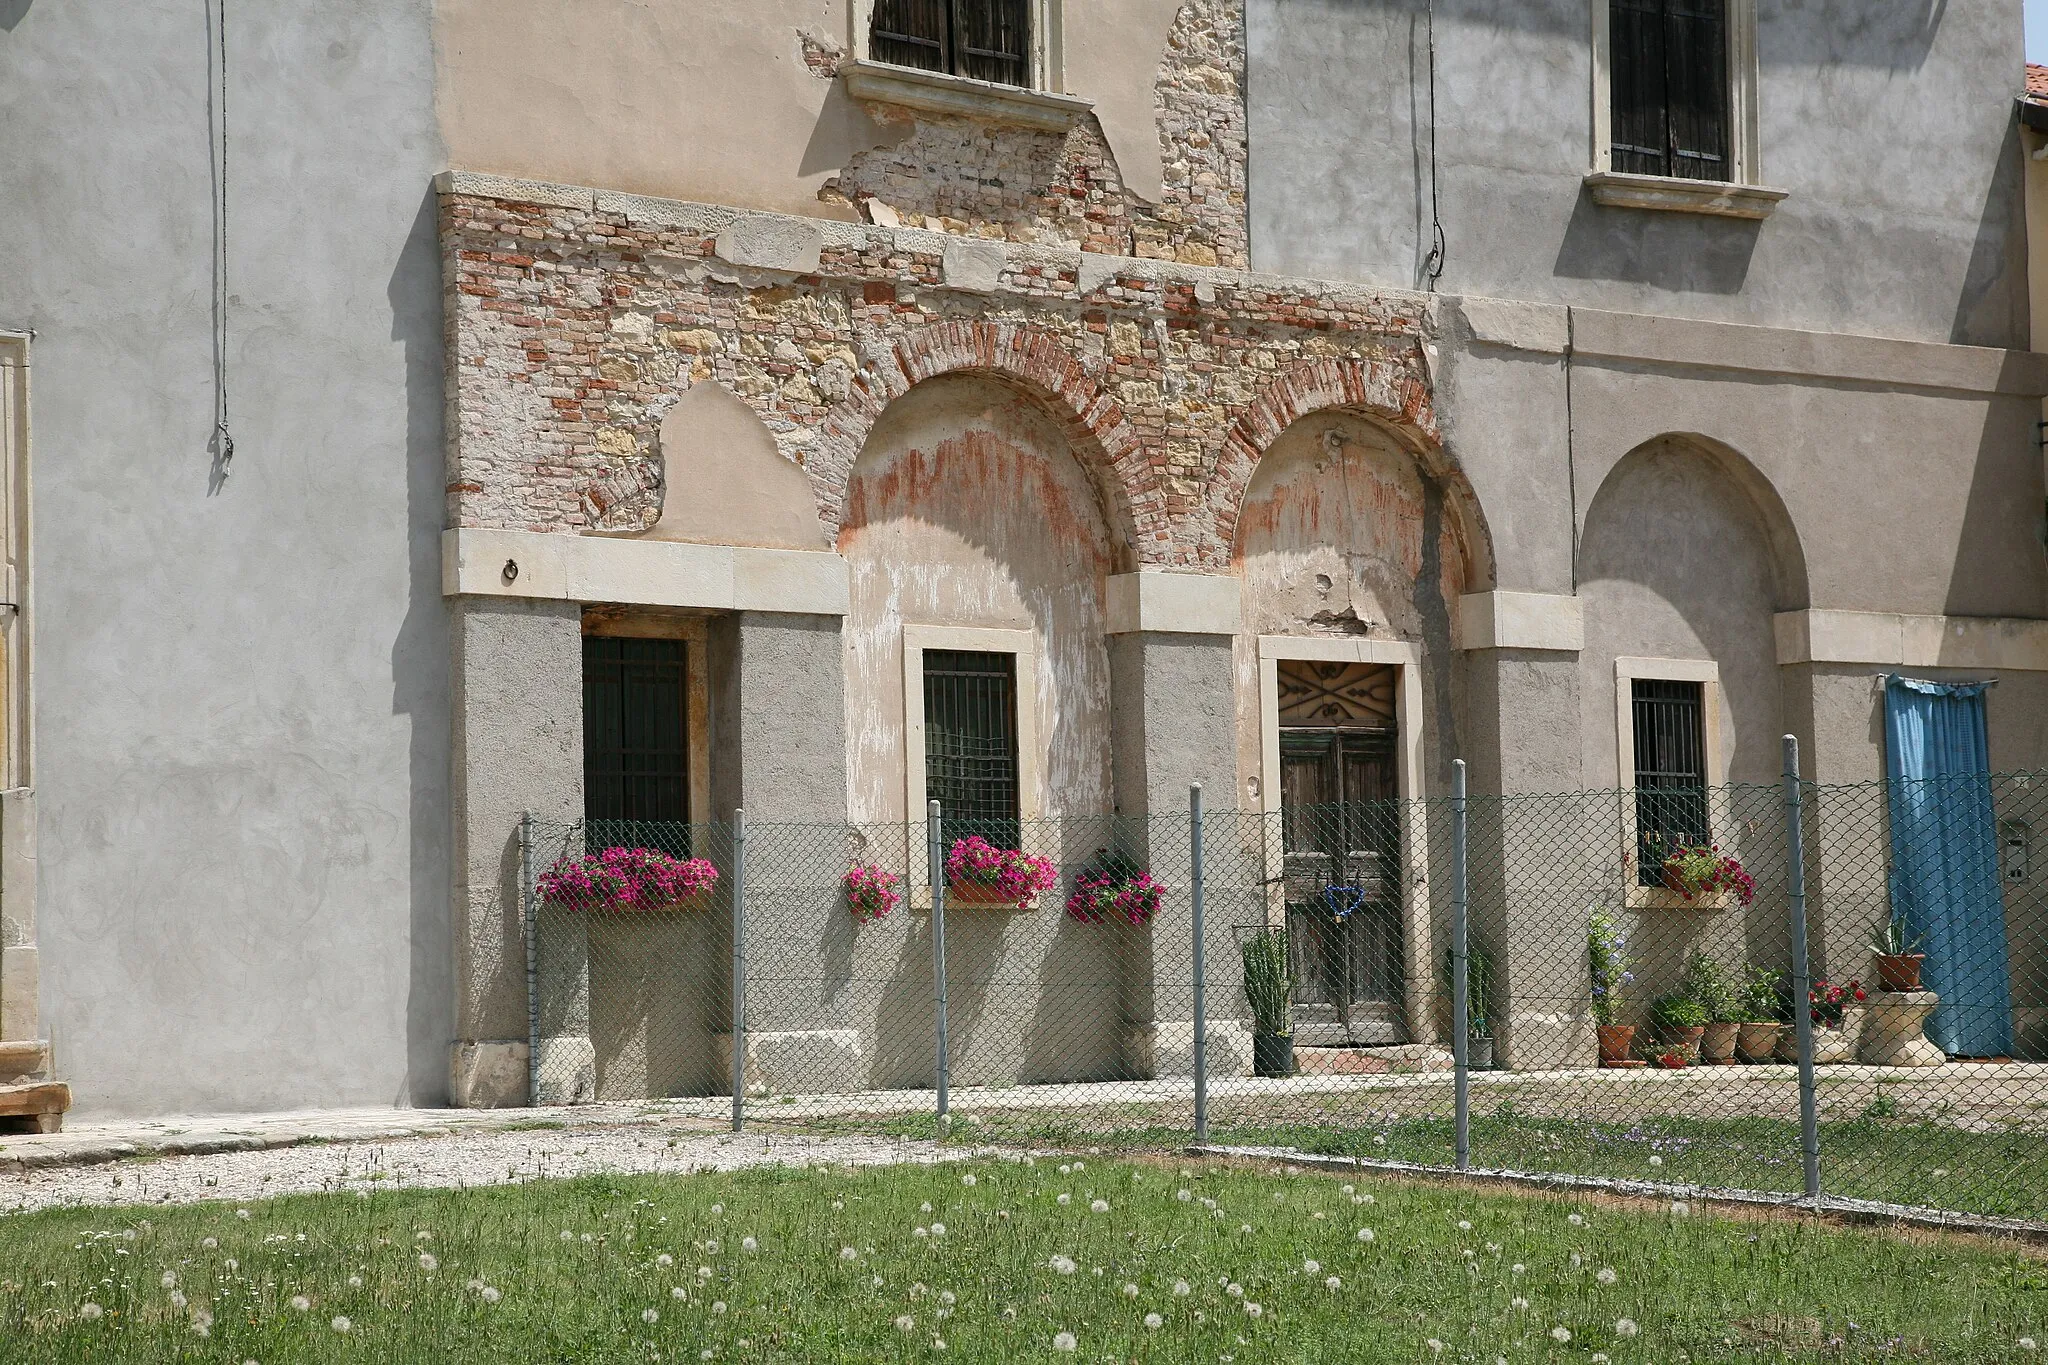 Photo showing: Villa Arnaldi at Meledo di Sarego is an unfinished project by Andrea Palladio